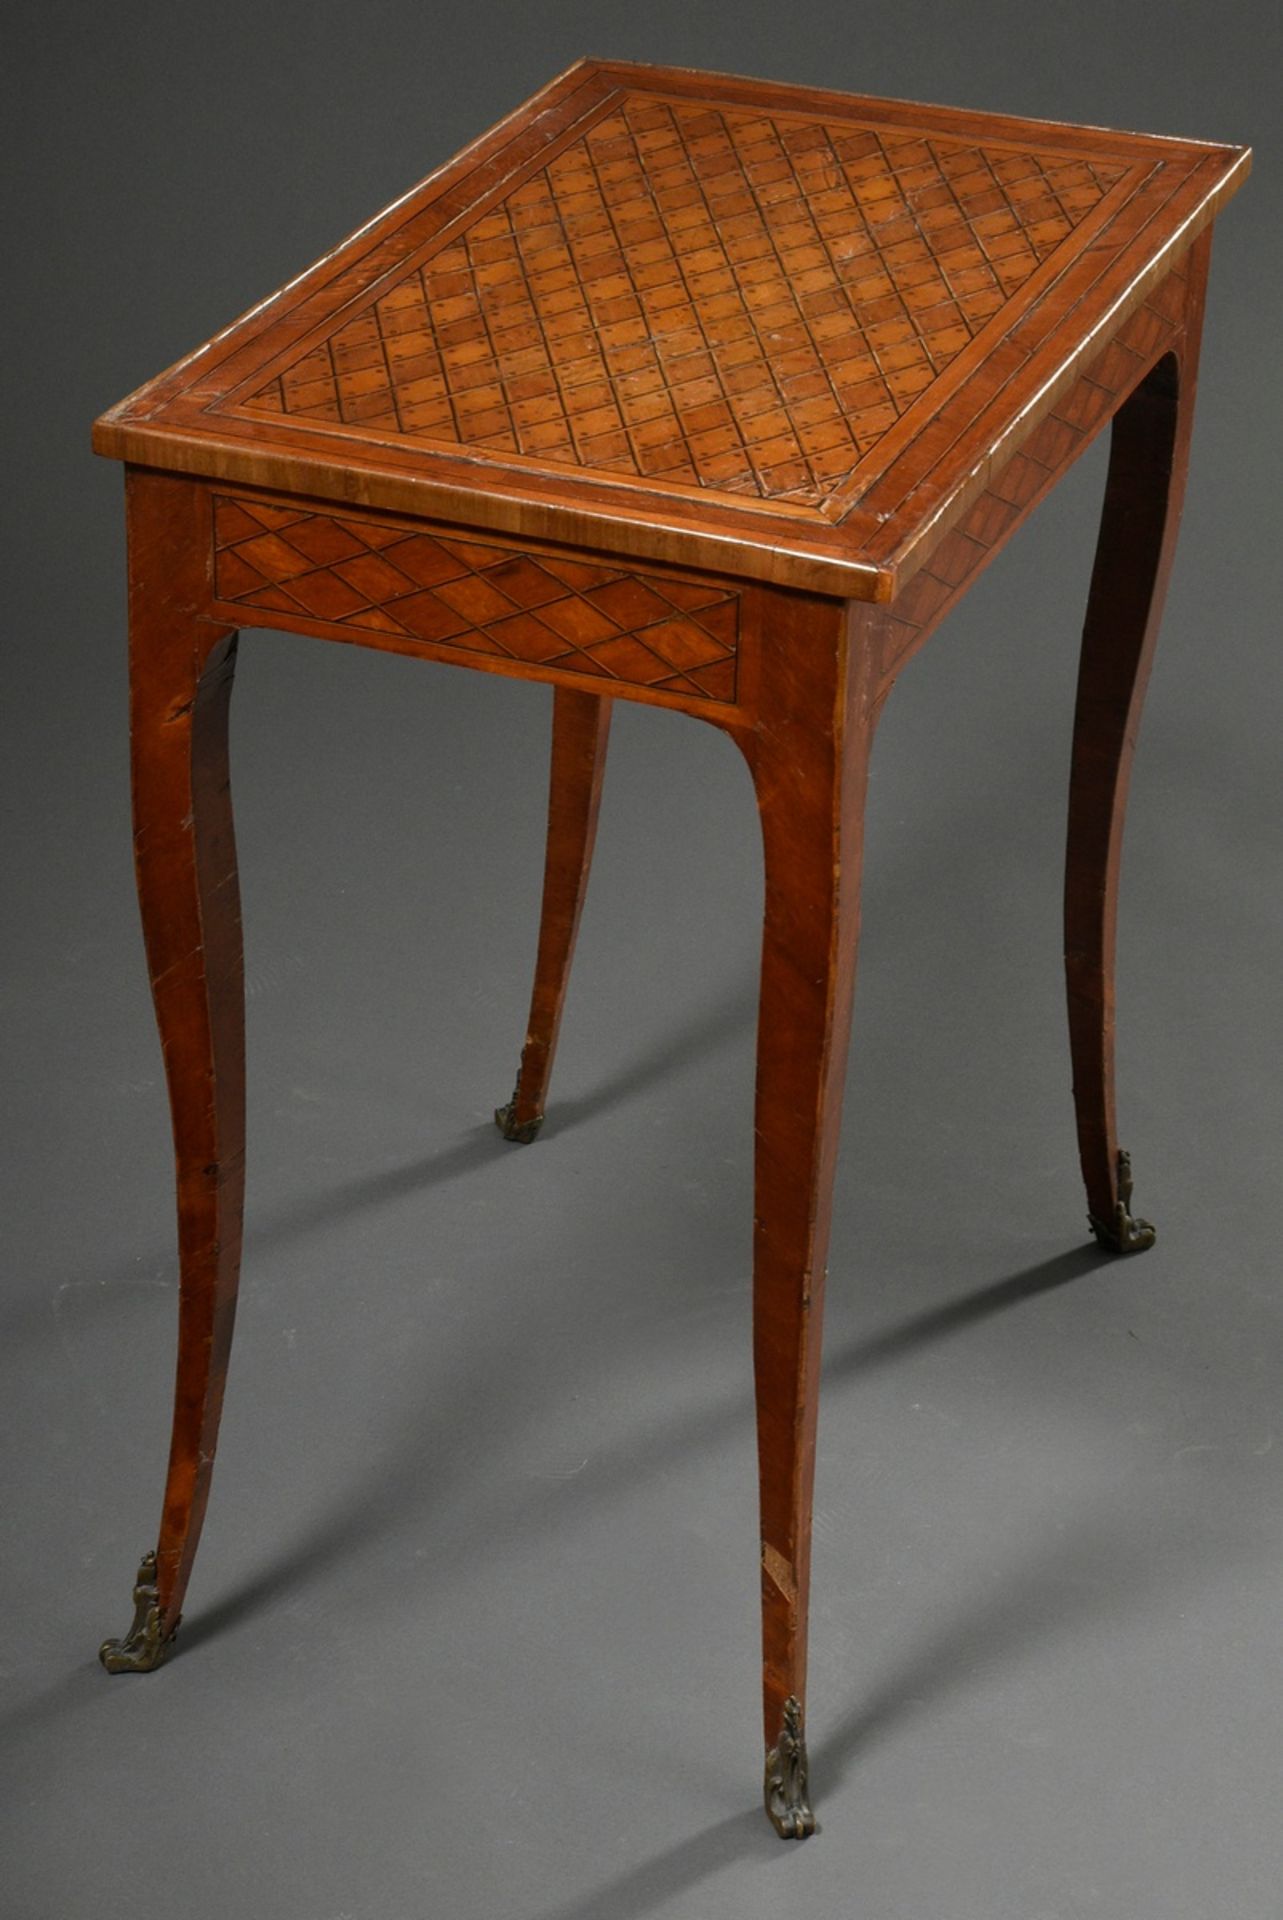 Ornamental Louis XV table with diamond and dot inlays on curved legs with ornamented bronze shoes,  - Image 4 of 5